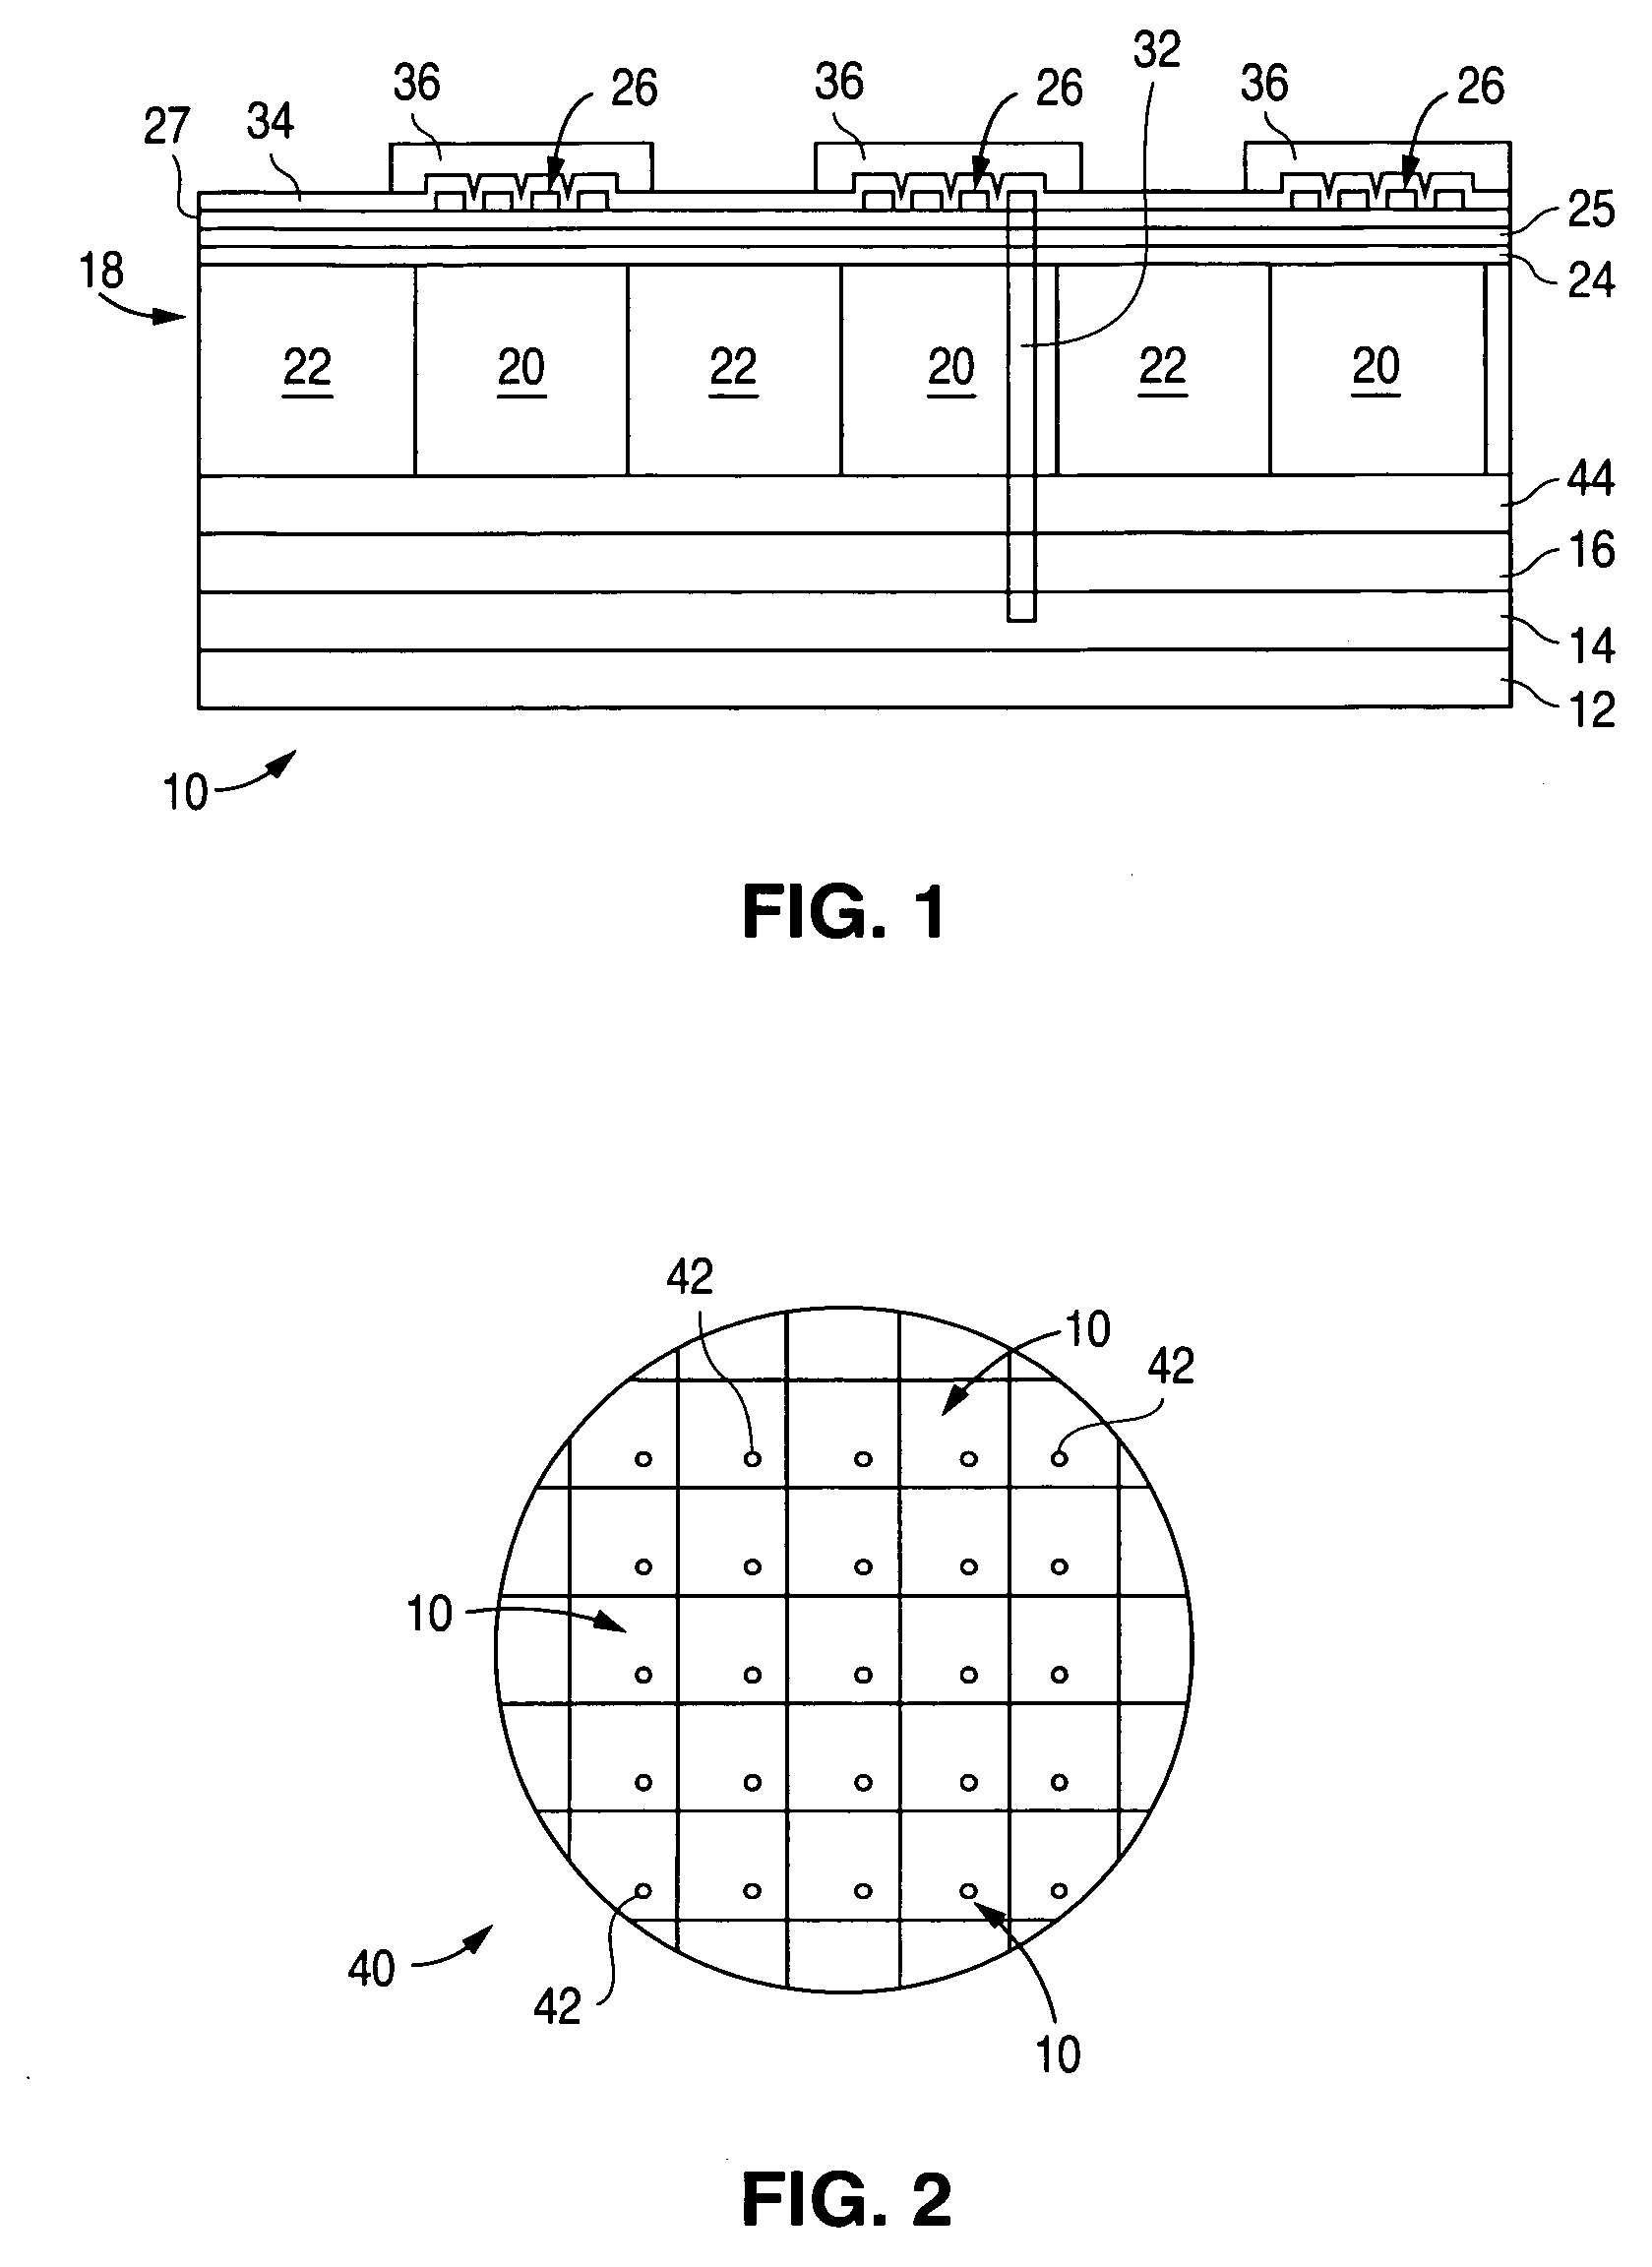 Magnetically enhanced power inductor with self-aligned hard axis magnetic core produced using a damascene process sequence